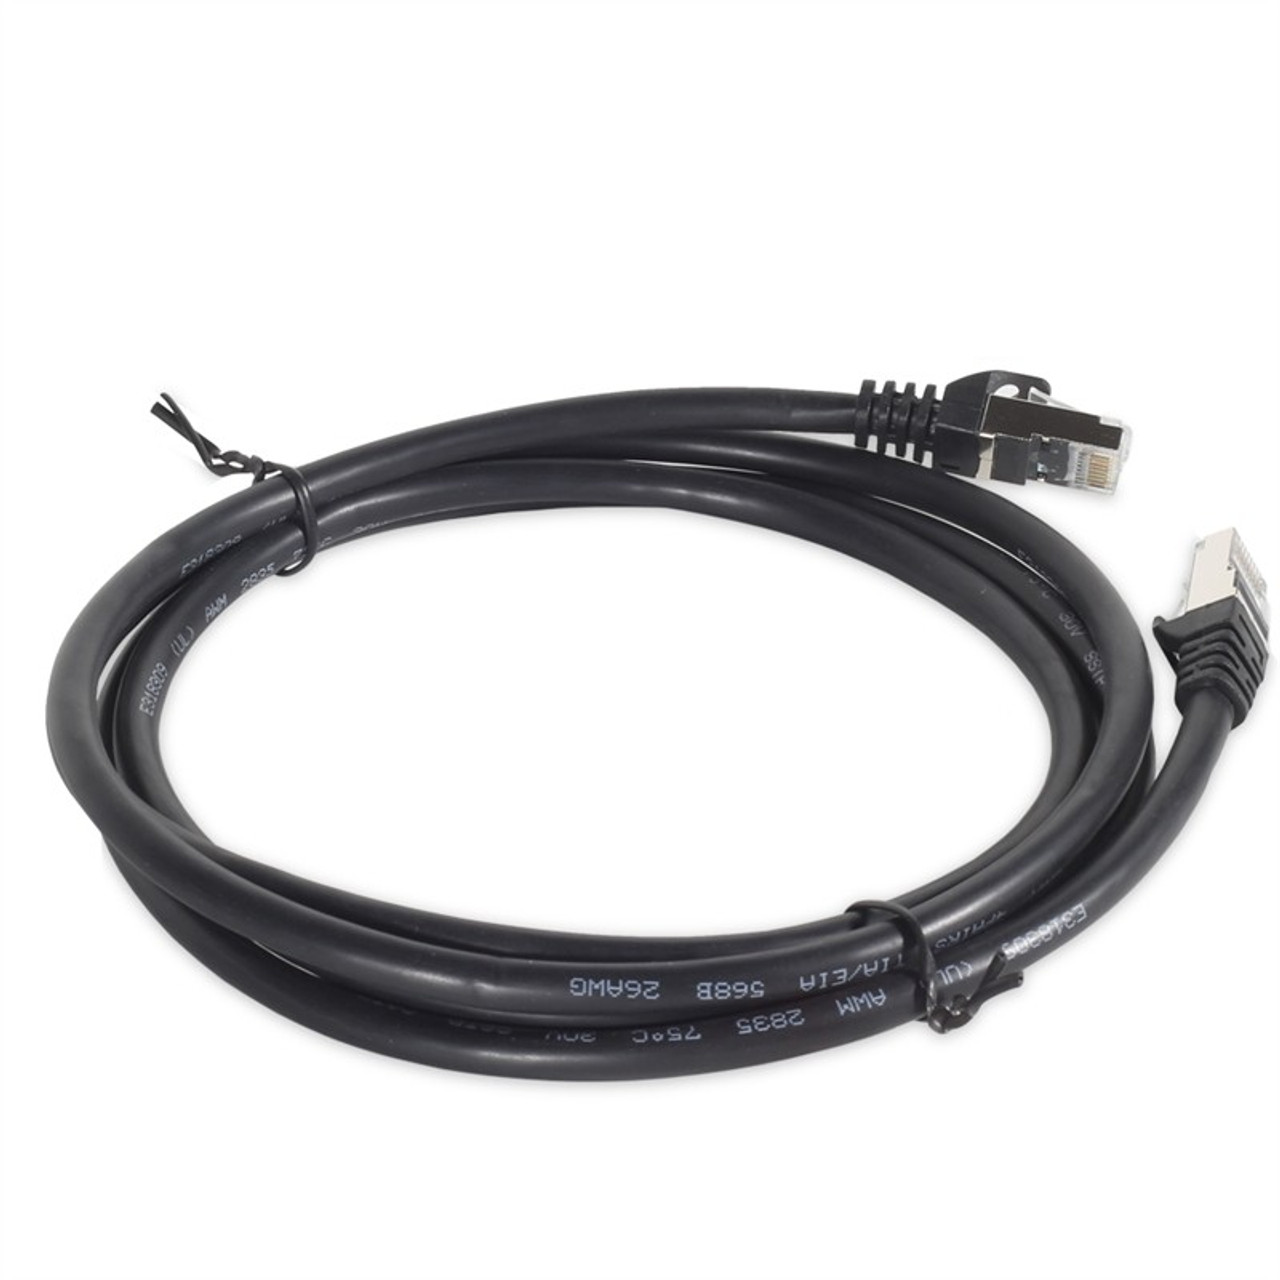 Poly 15' Microphone Cable, 2200-41220-002